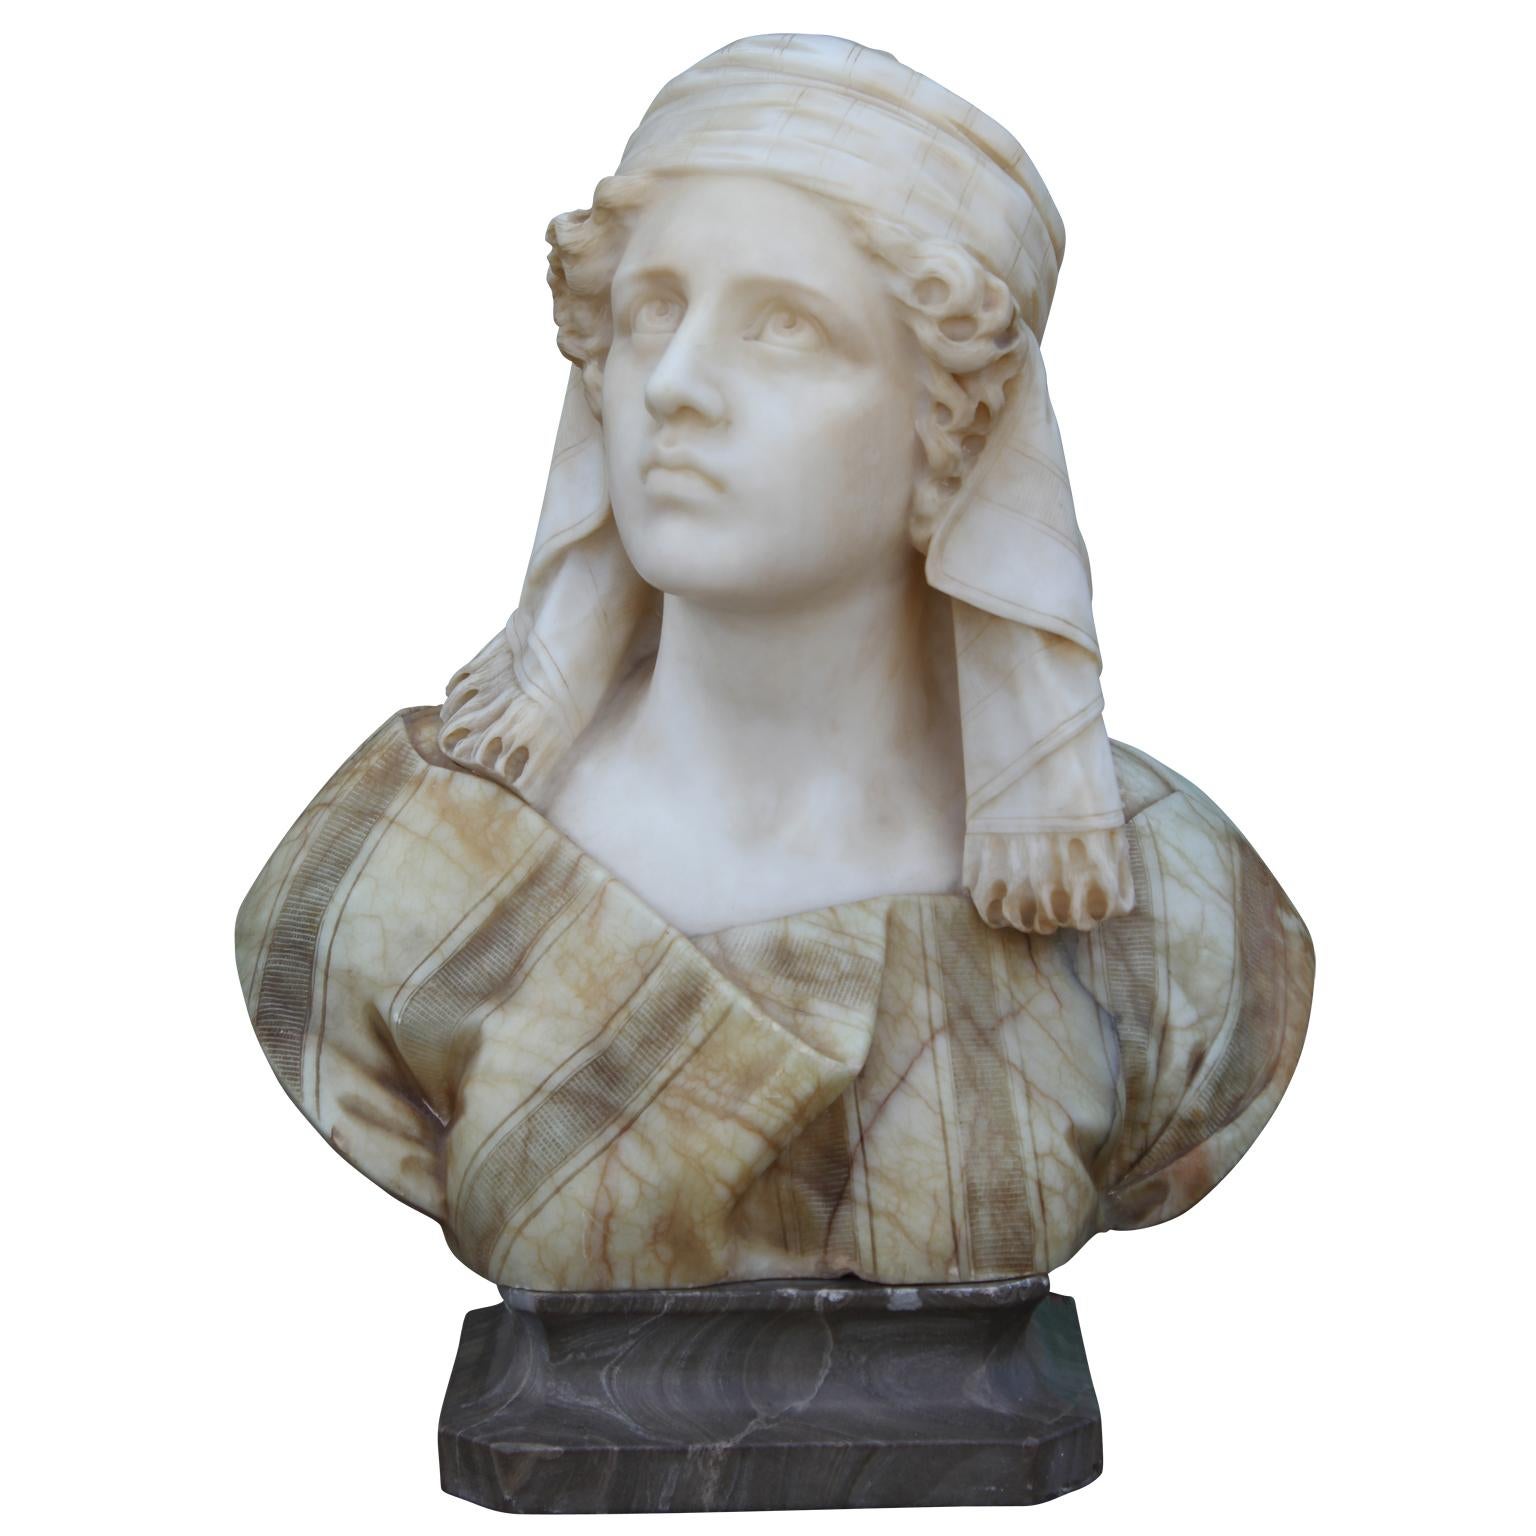 Lovely Alabaster figure of a woman with detachable pedestal by Giuseppe Bessi.  Giuseppe (Professor) Bessi was an Italian sculptor famed for his lifelike busts and sculptures, such as prominent figures Ludwig van Beethoven, Joan of Arc, and Dante